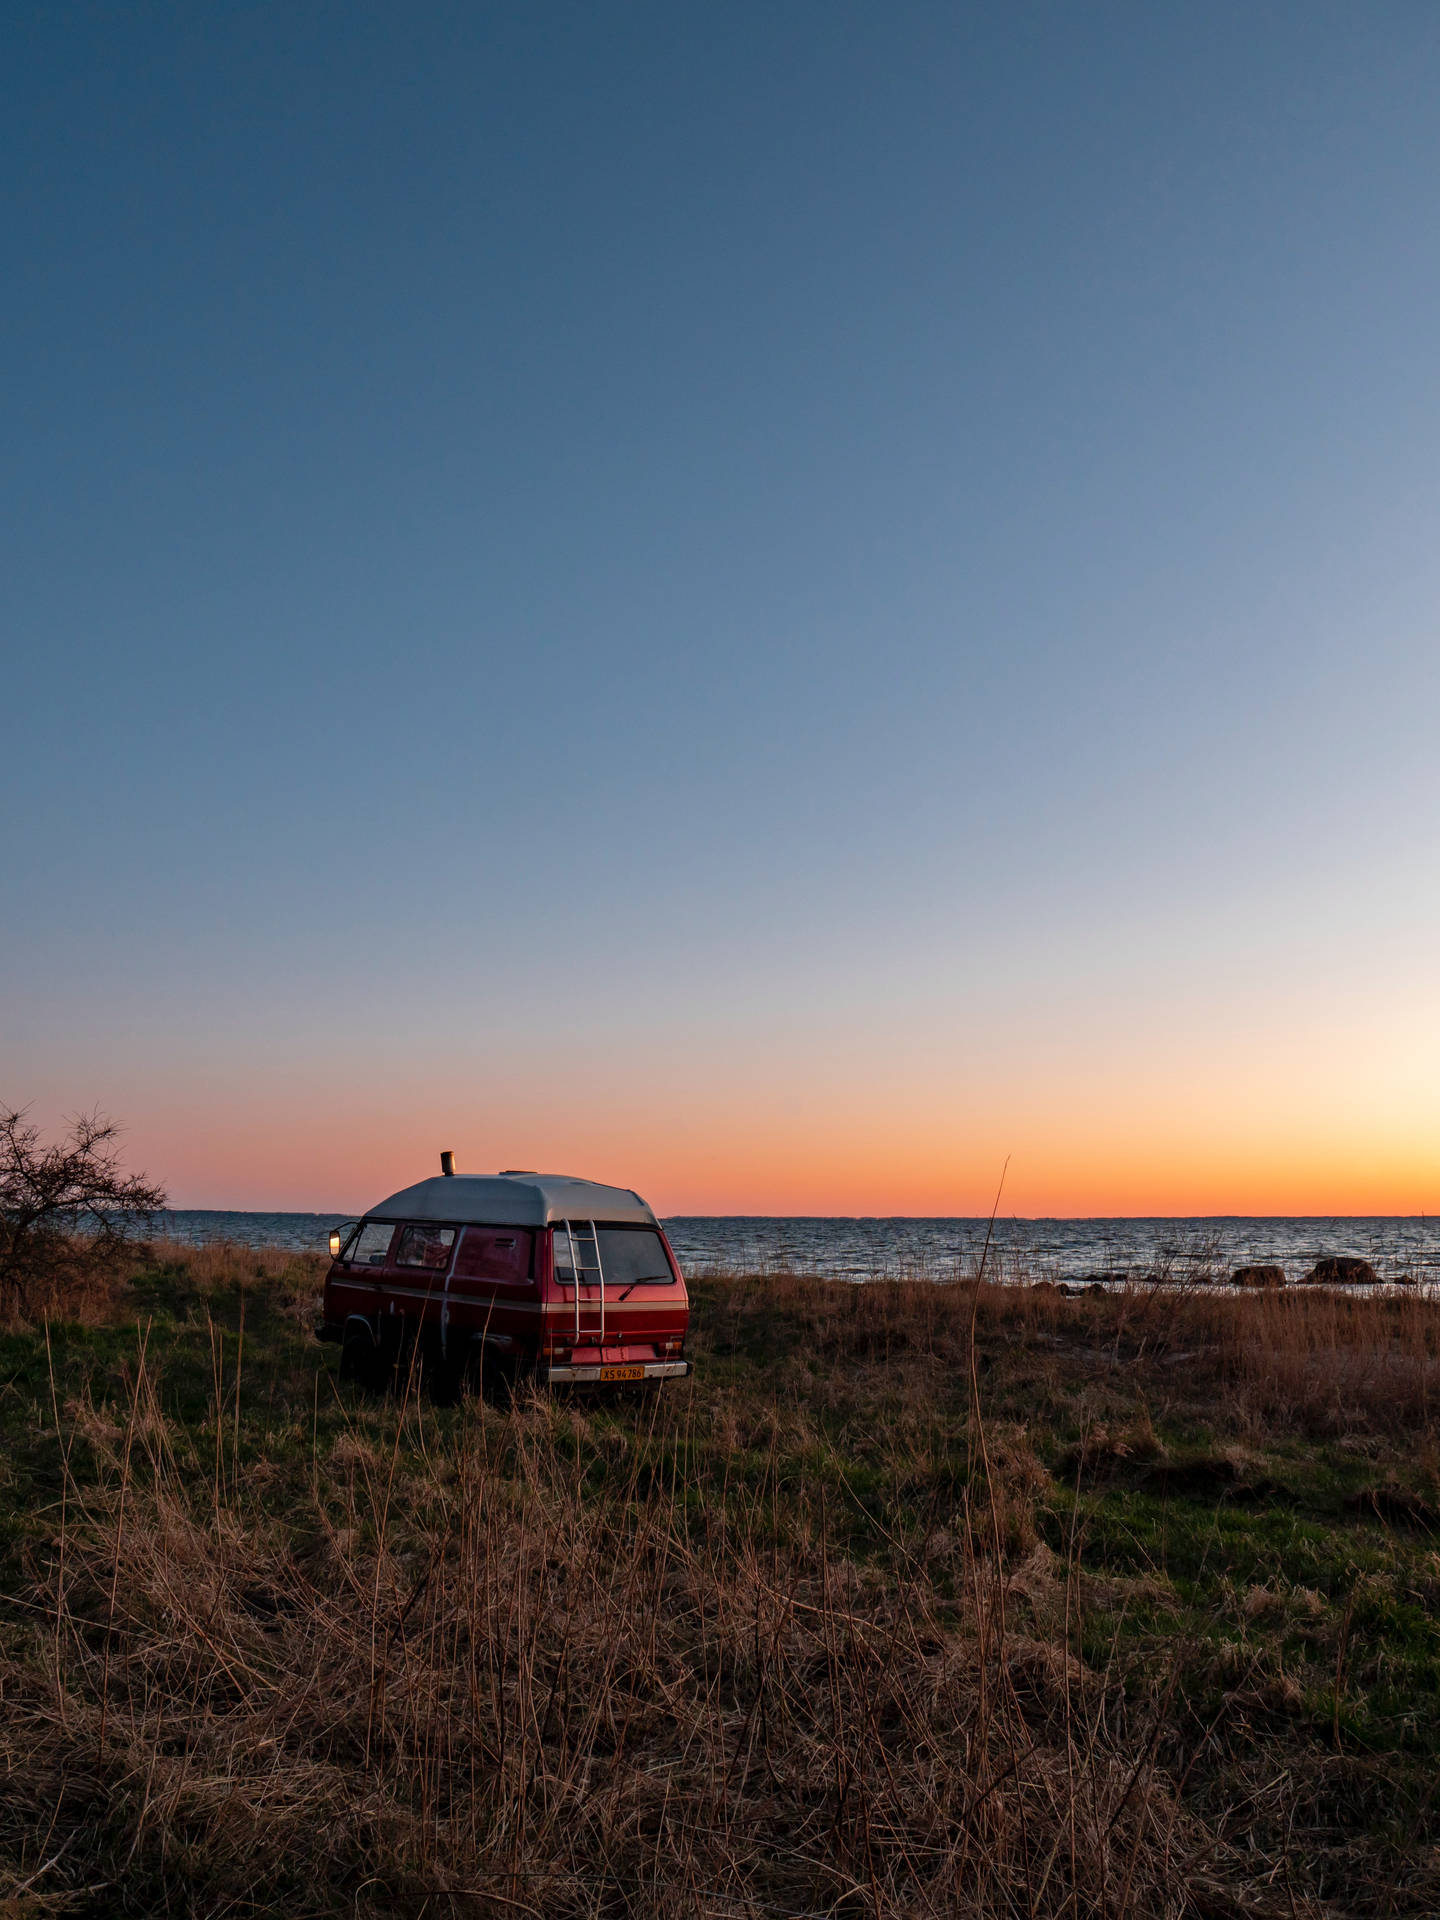 A Van Parked In A Field Near The Ocean Background